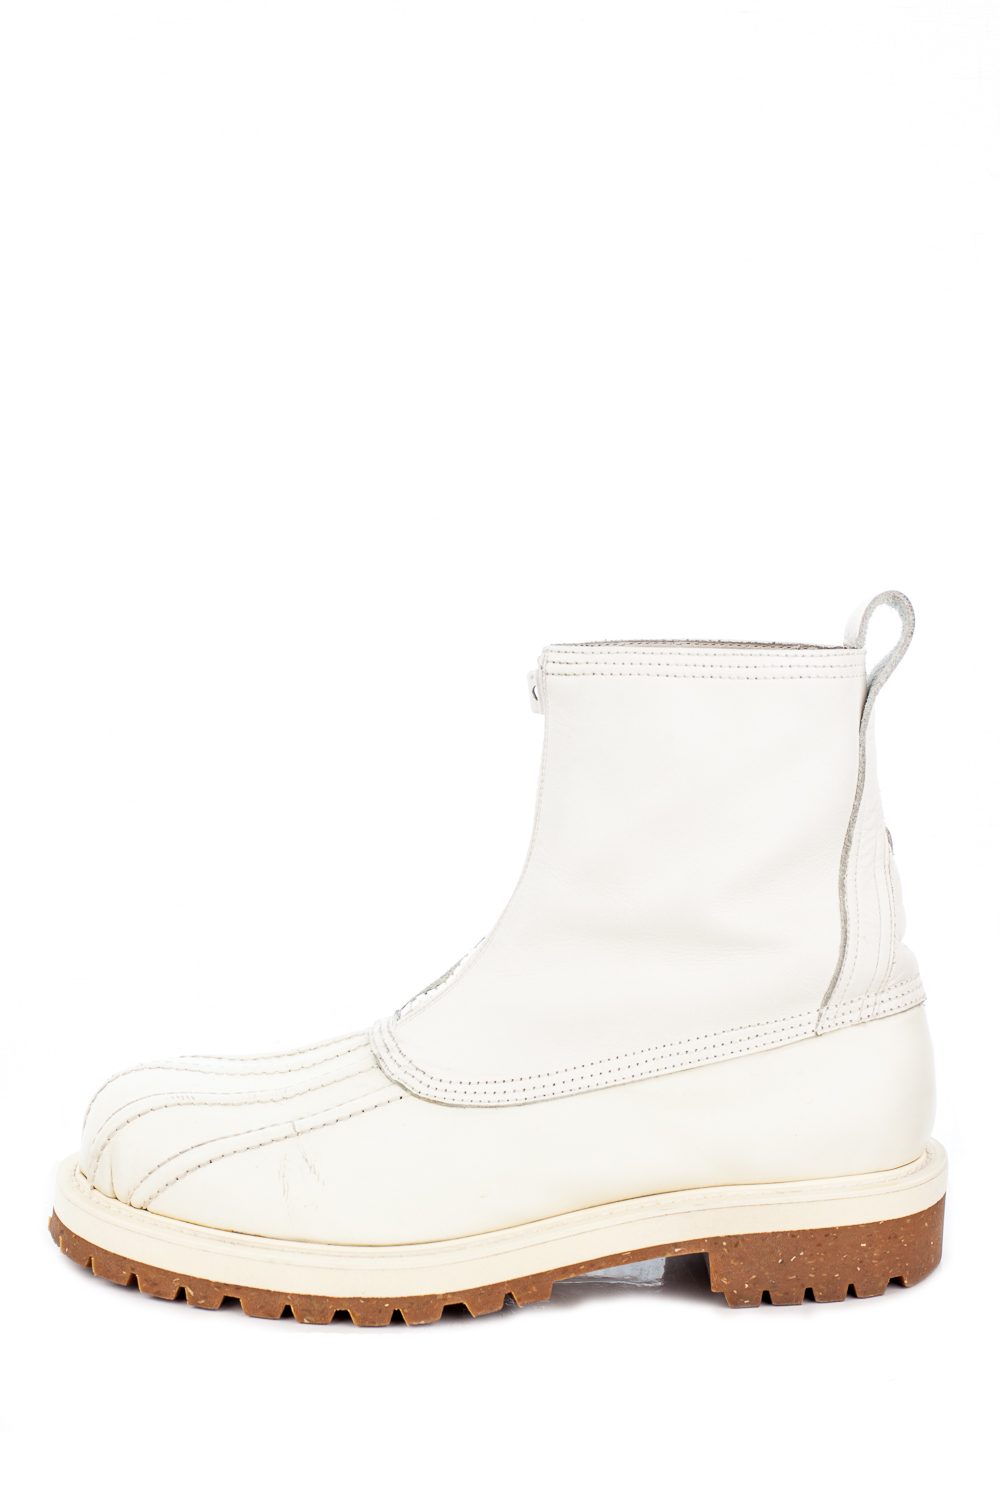 FW14 Zipped Off White Duck Boots